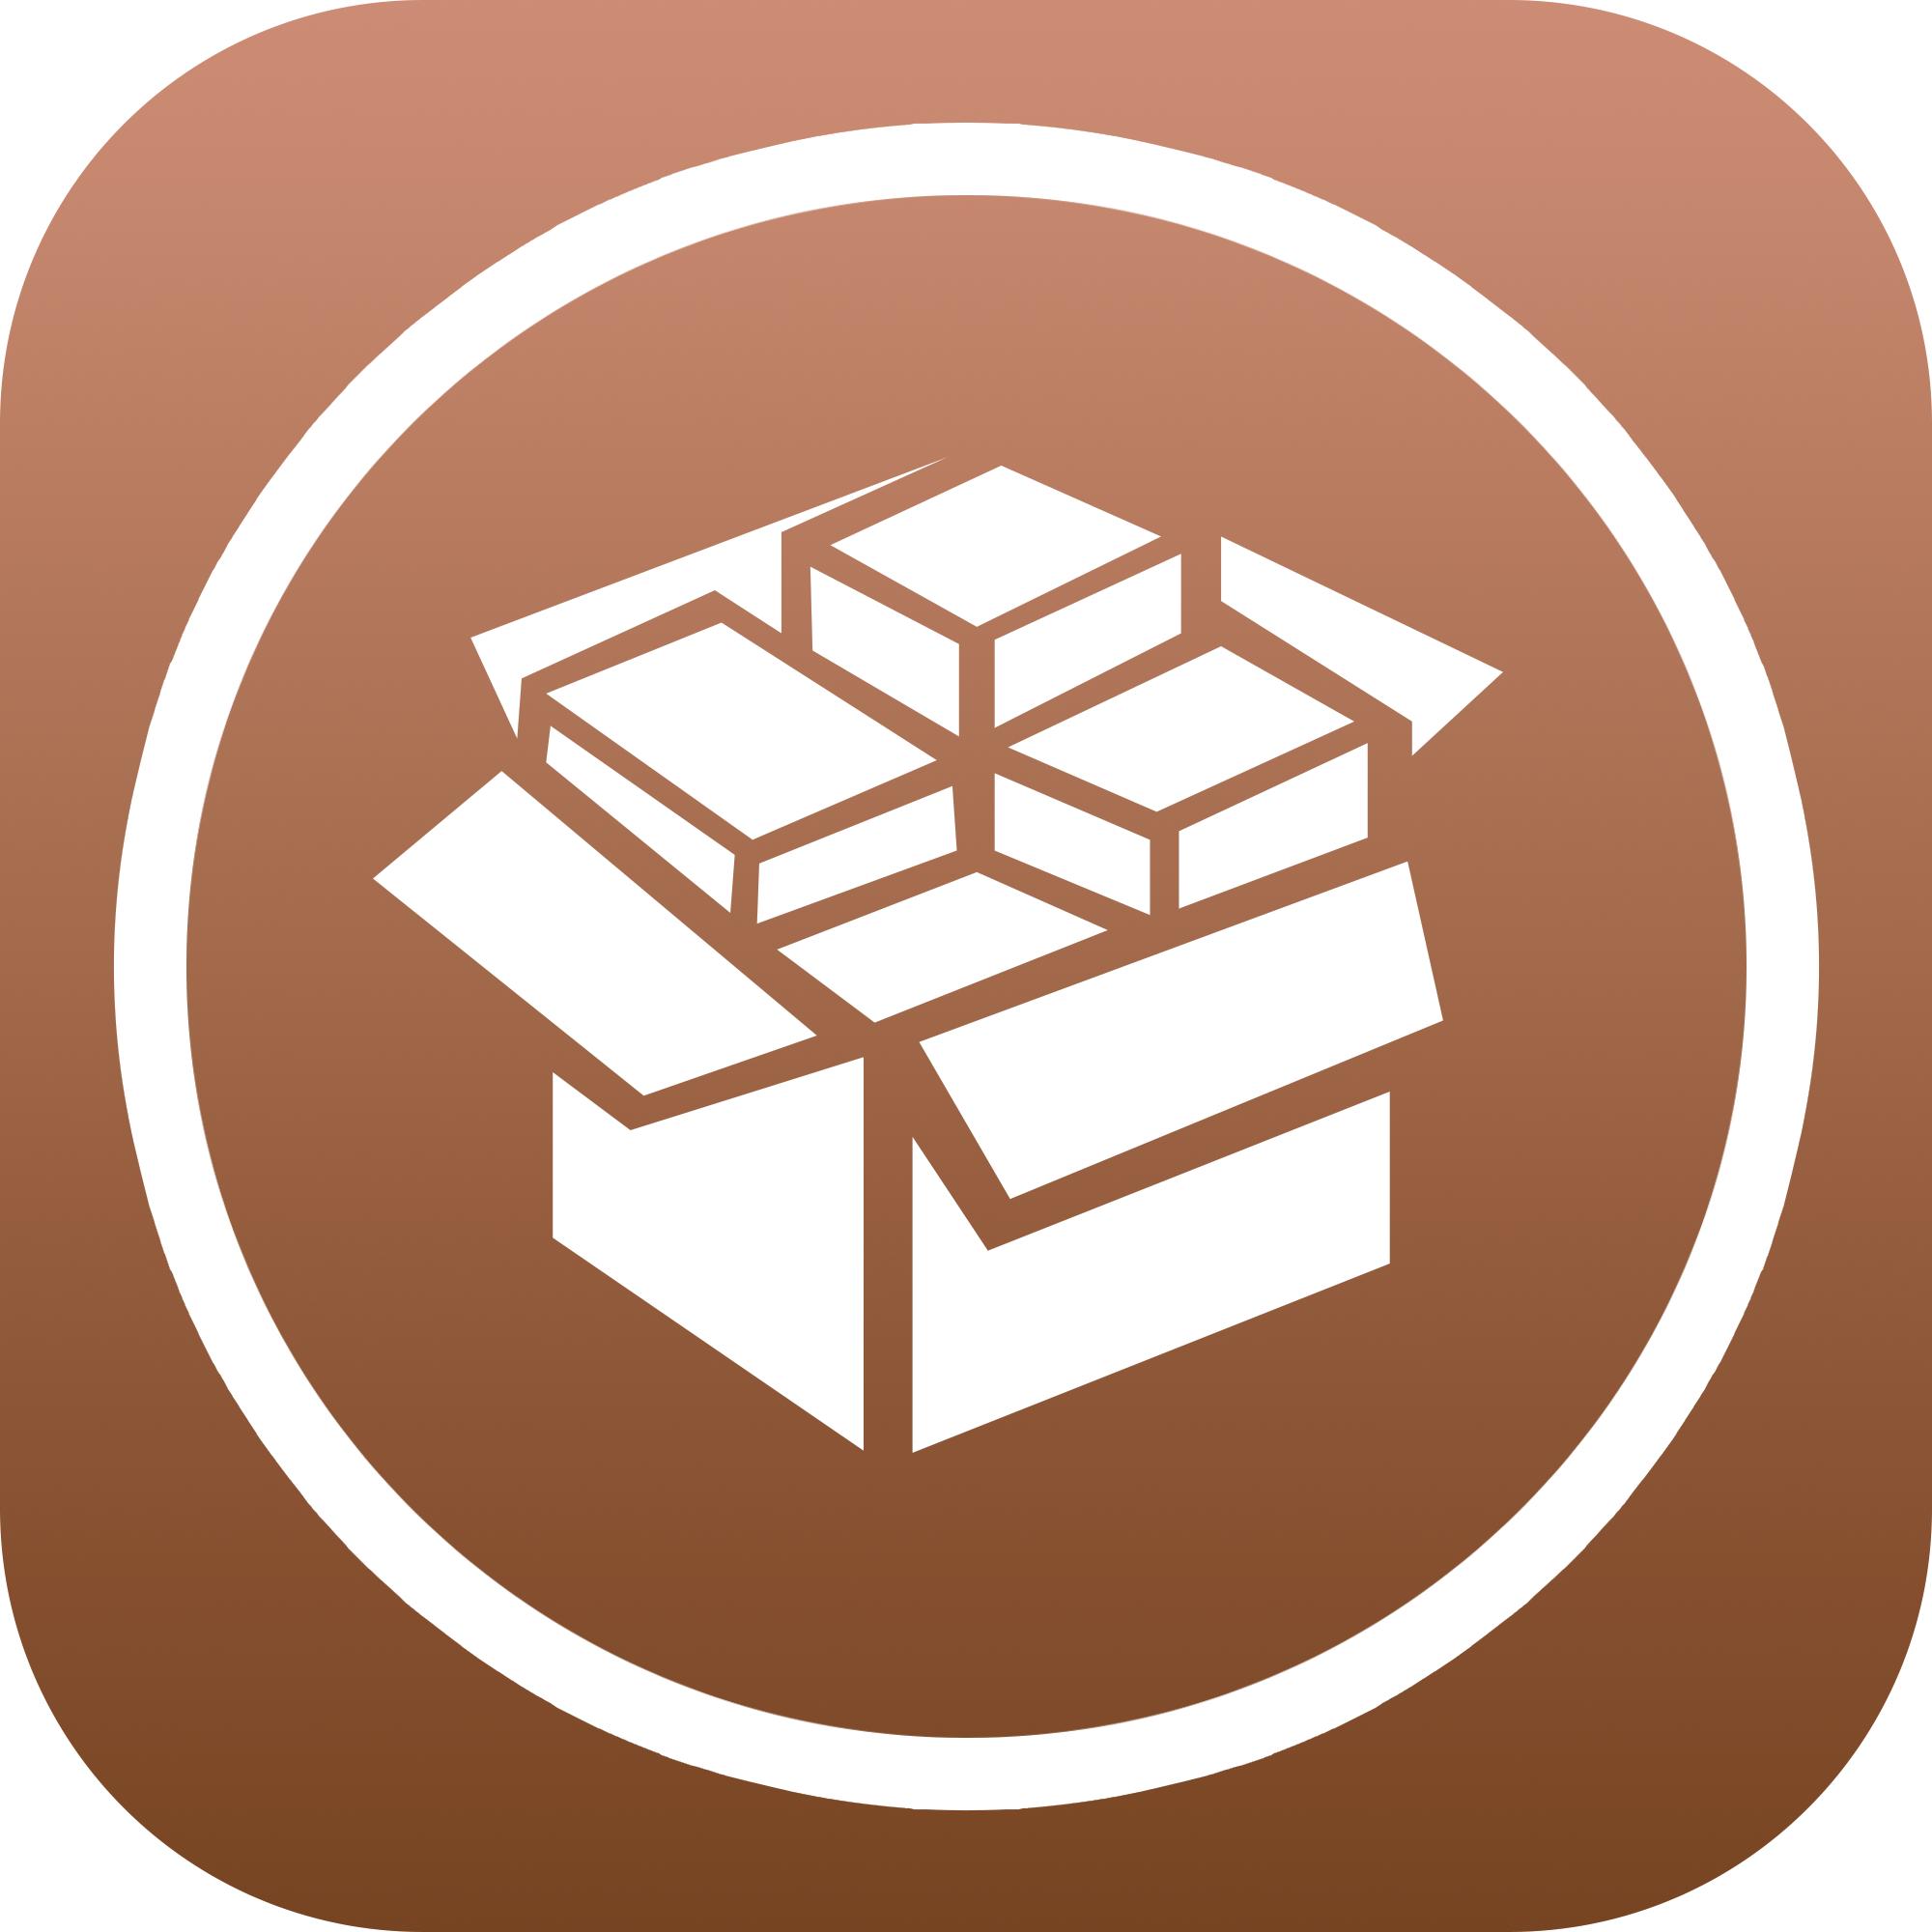 Jailbreak Logo - How to fix boot loop on a jailbroken iPhone or iPad with 'No